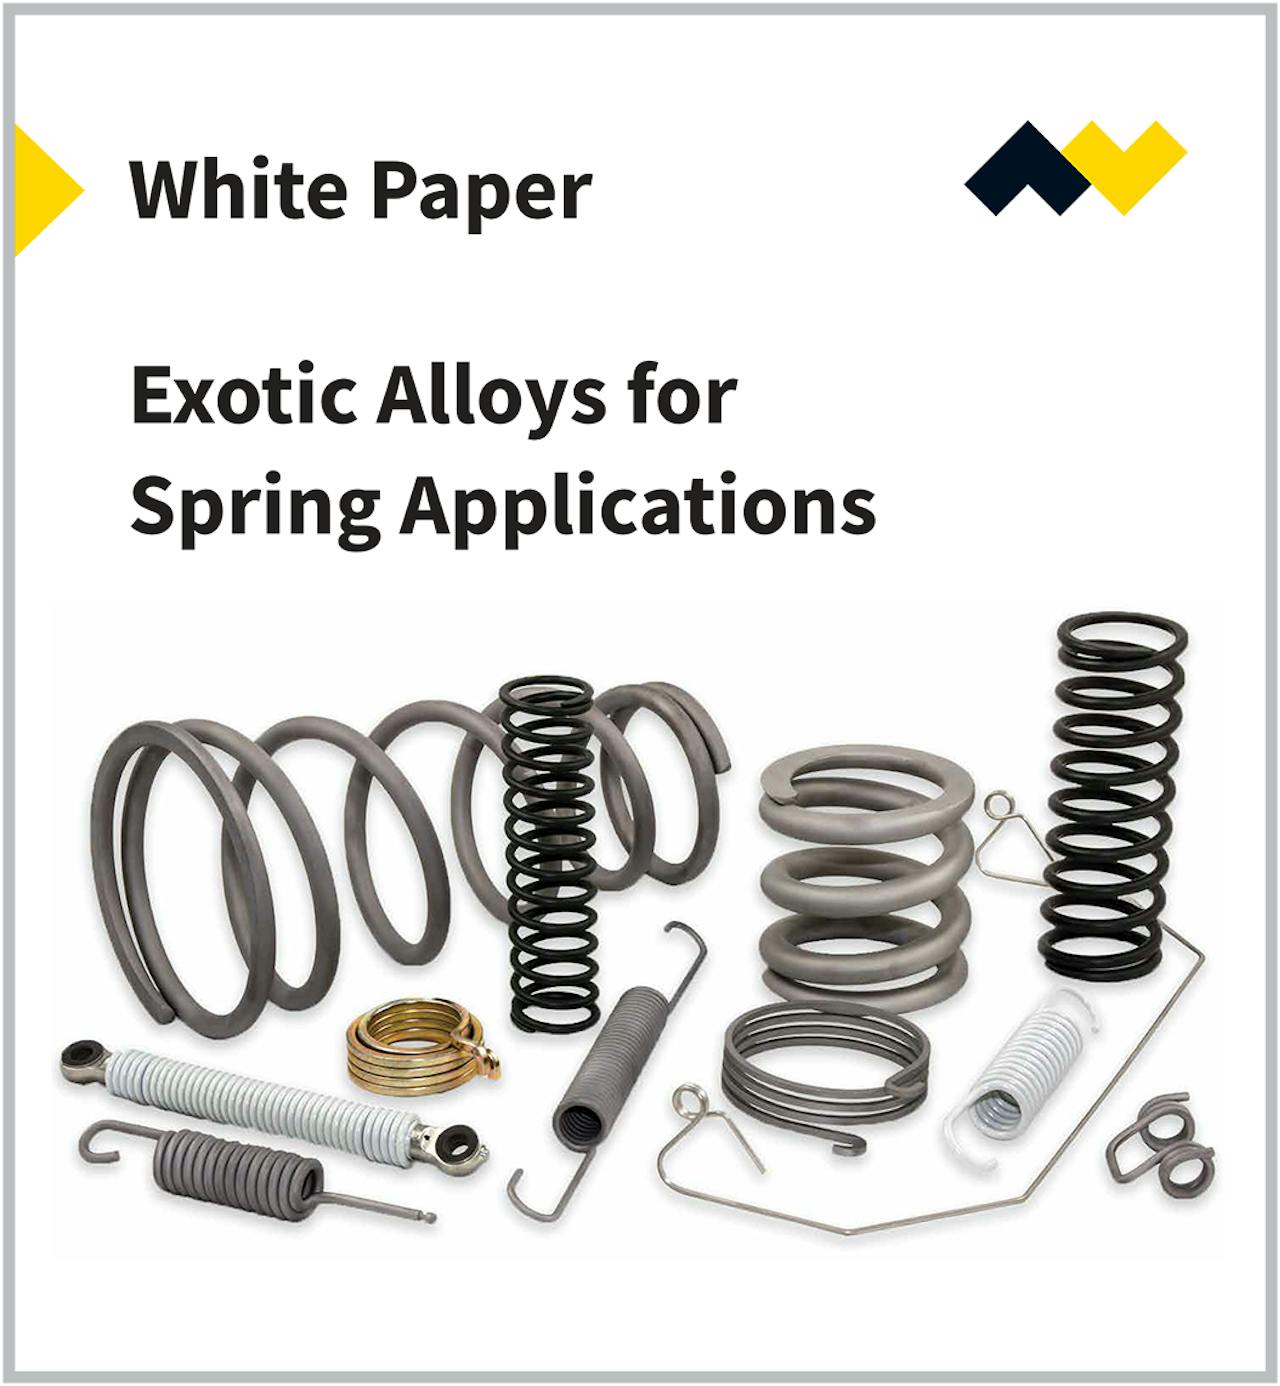 Exotic Alloys for Spring Applications